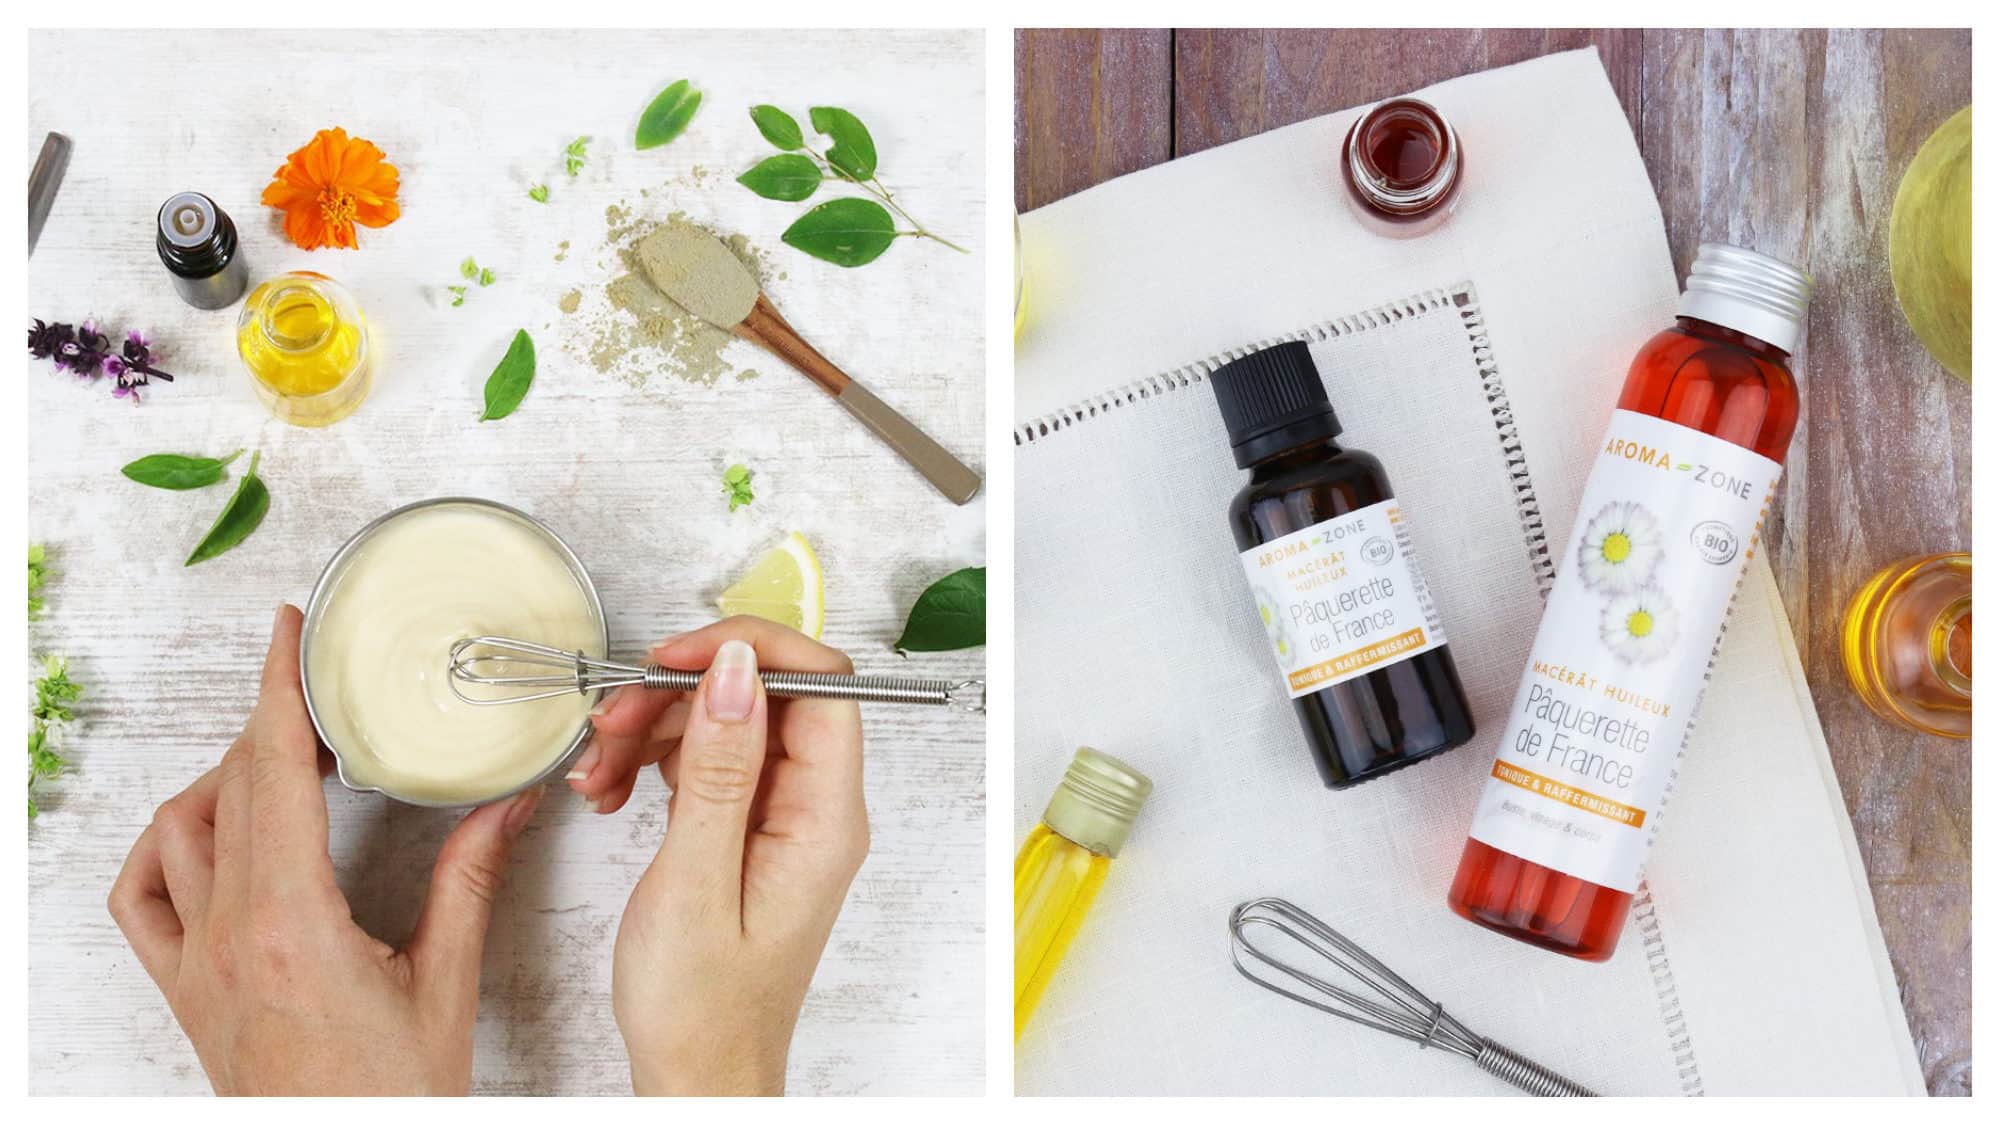 Parisian organic beauty store Aroma Zone's DIY products being mixed by a woman (left) and bottles of oils and ointments laid out on a wooden table (right).